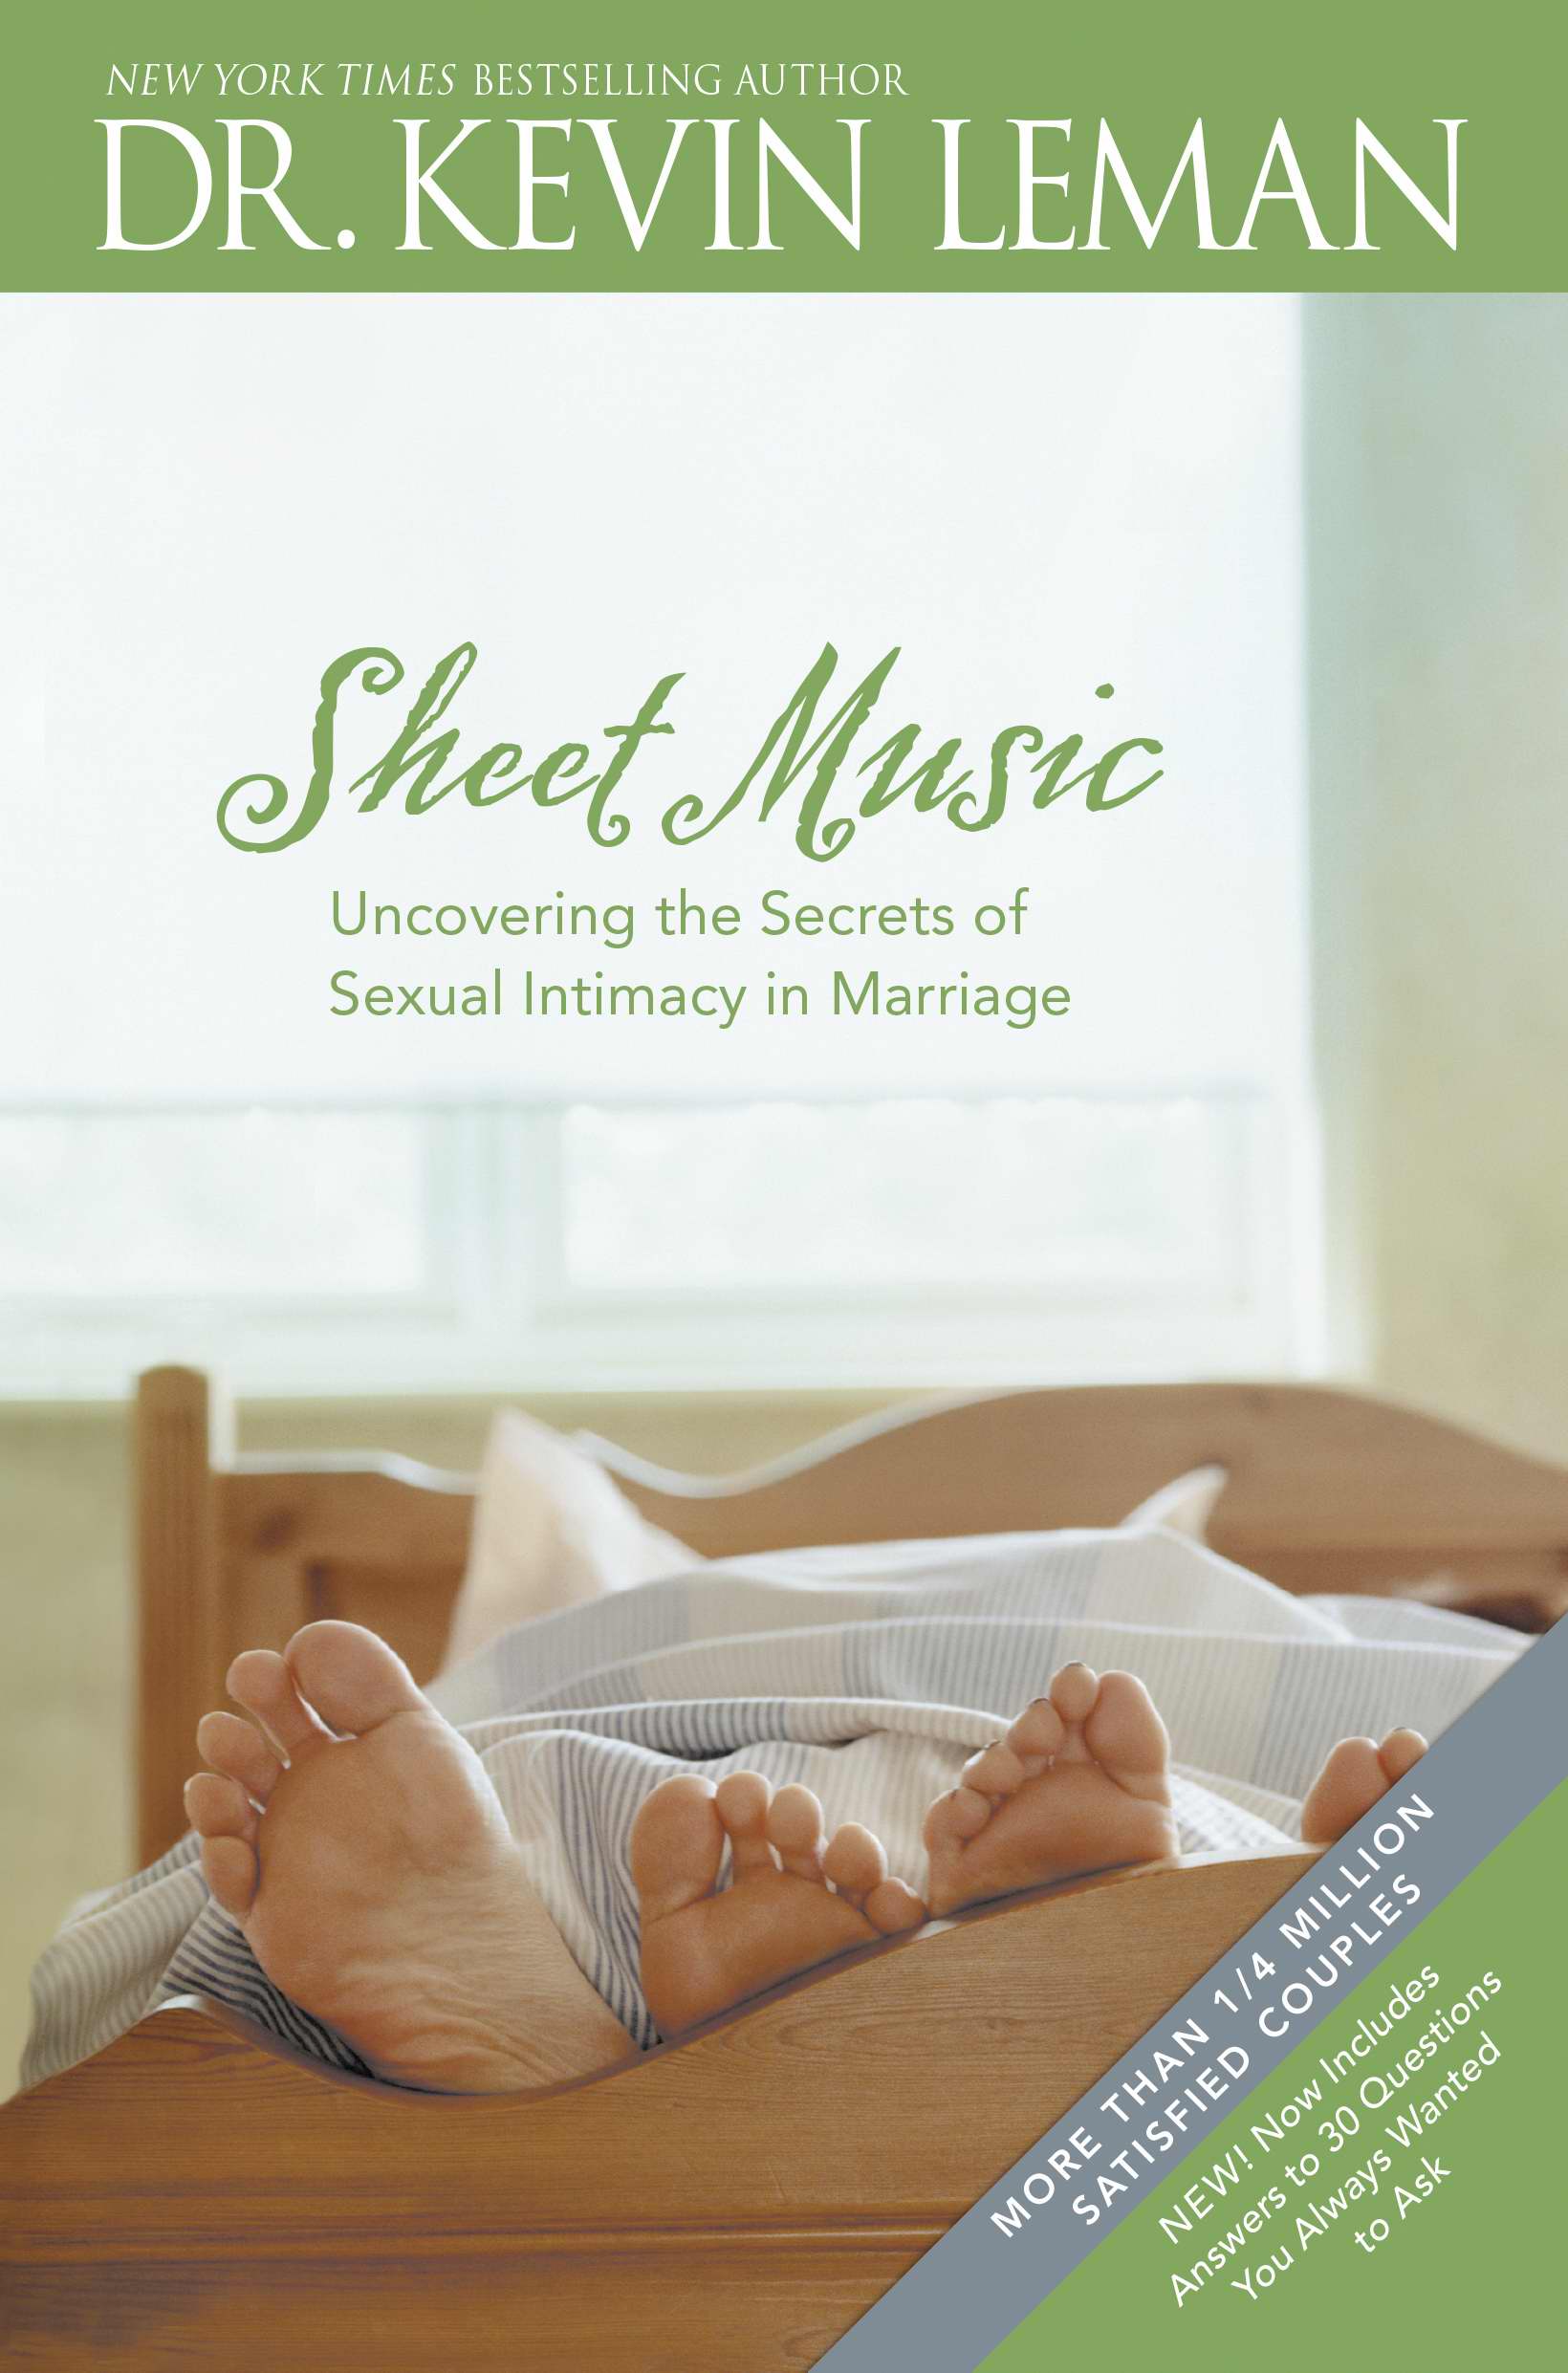 Image of Sheet Music: Uncovering the Secrets of Sexual Intimacy in Marriage other